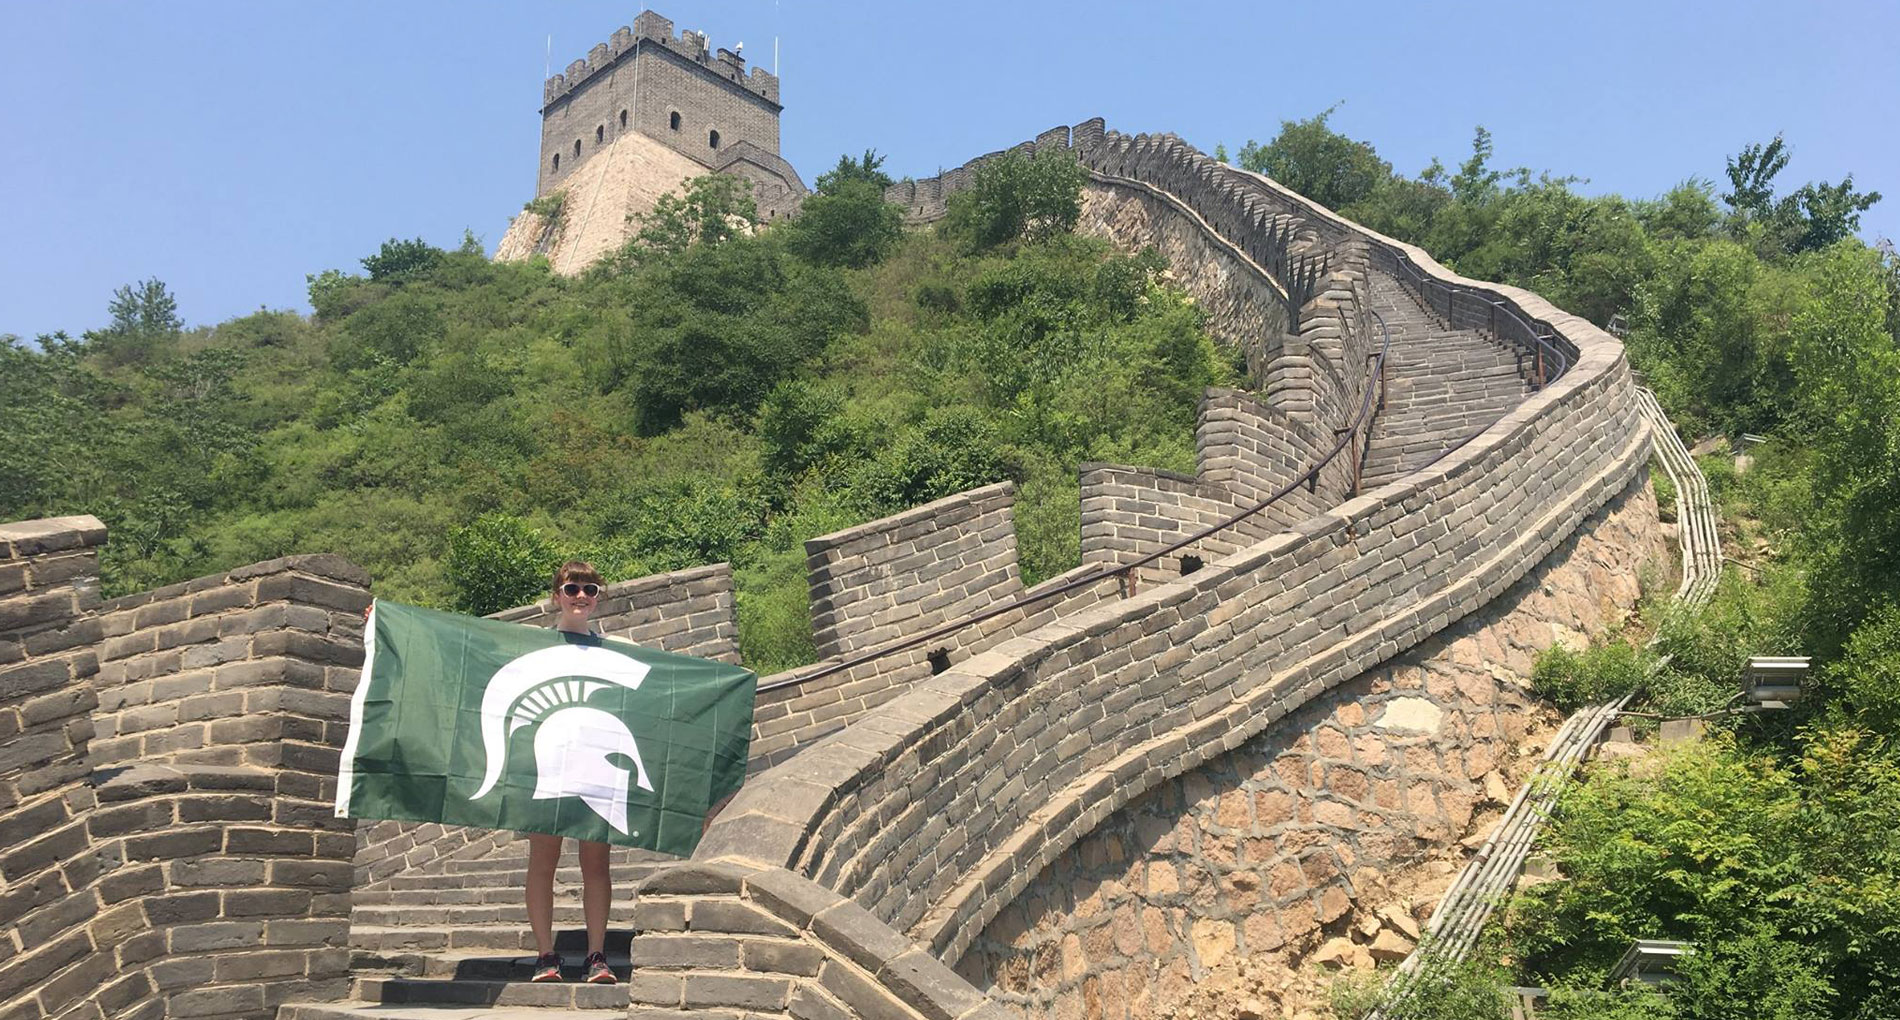 a student with tied back hair holding a spartan flag on the great wall of china